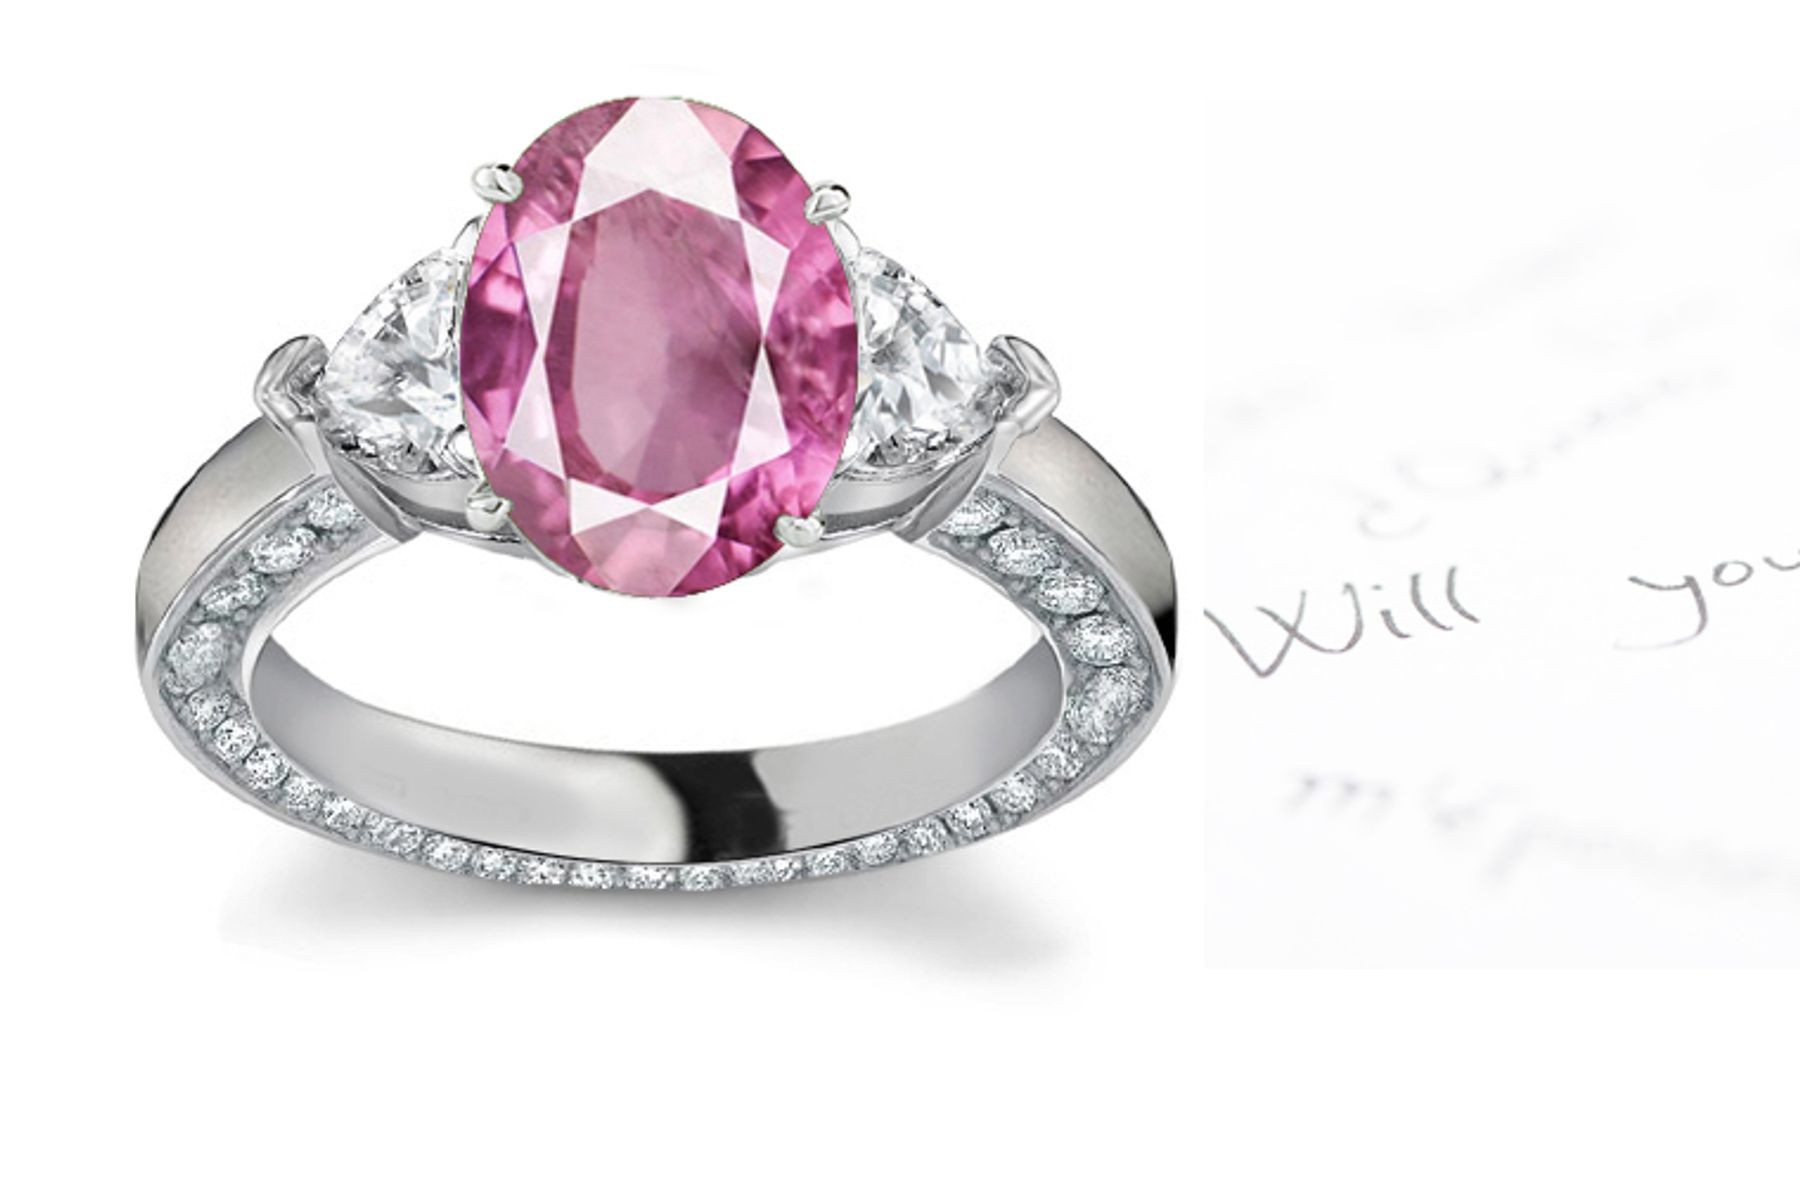 3 Stone Oval Pink Sapphire & Heart Diamond Ring in Platinum & White gold